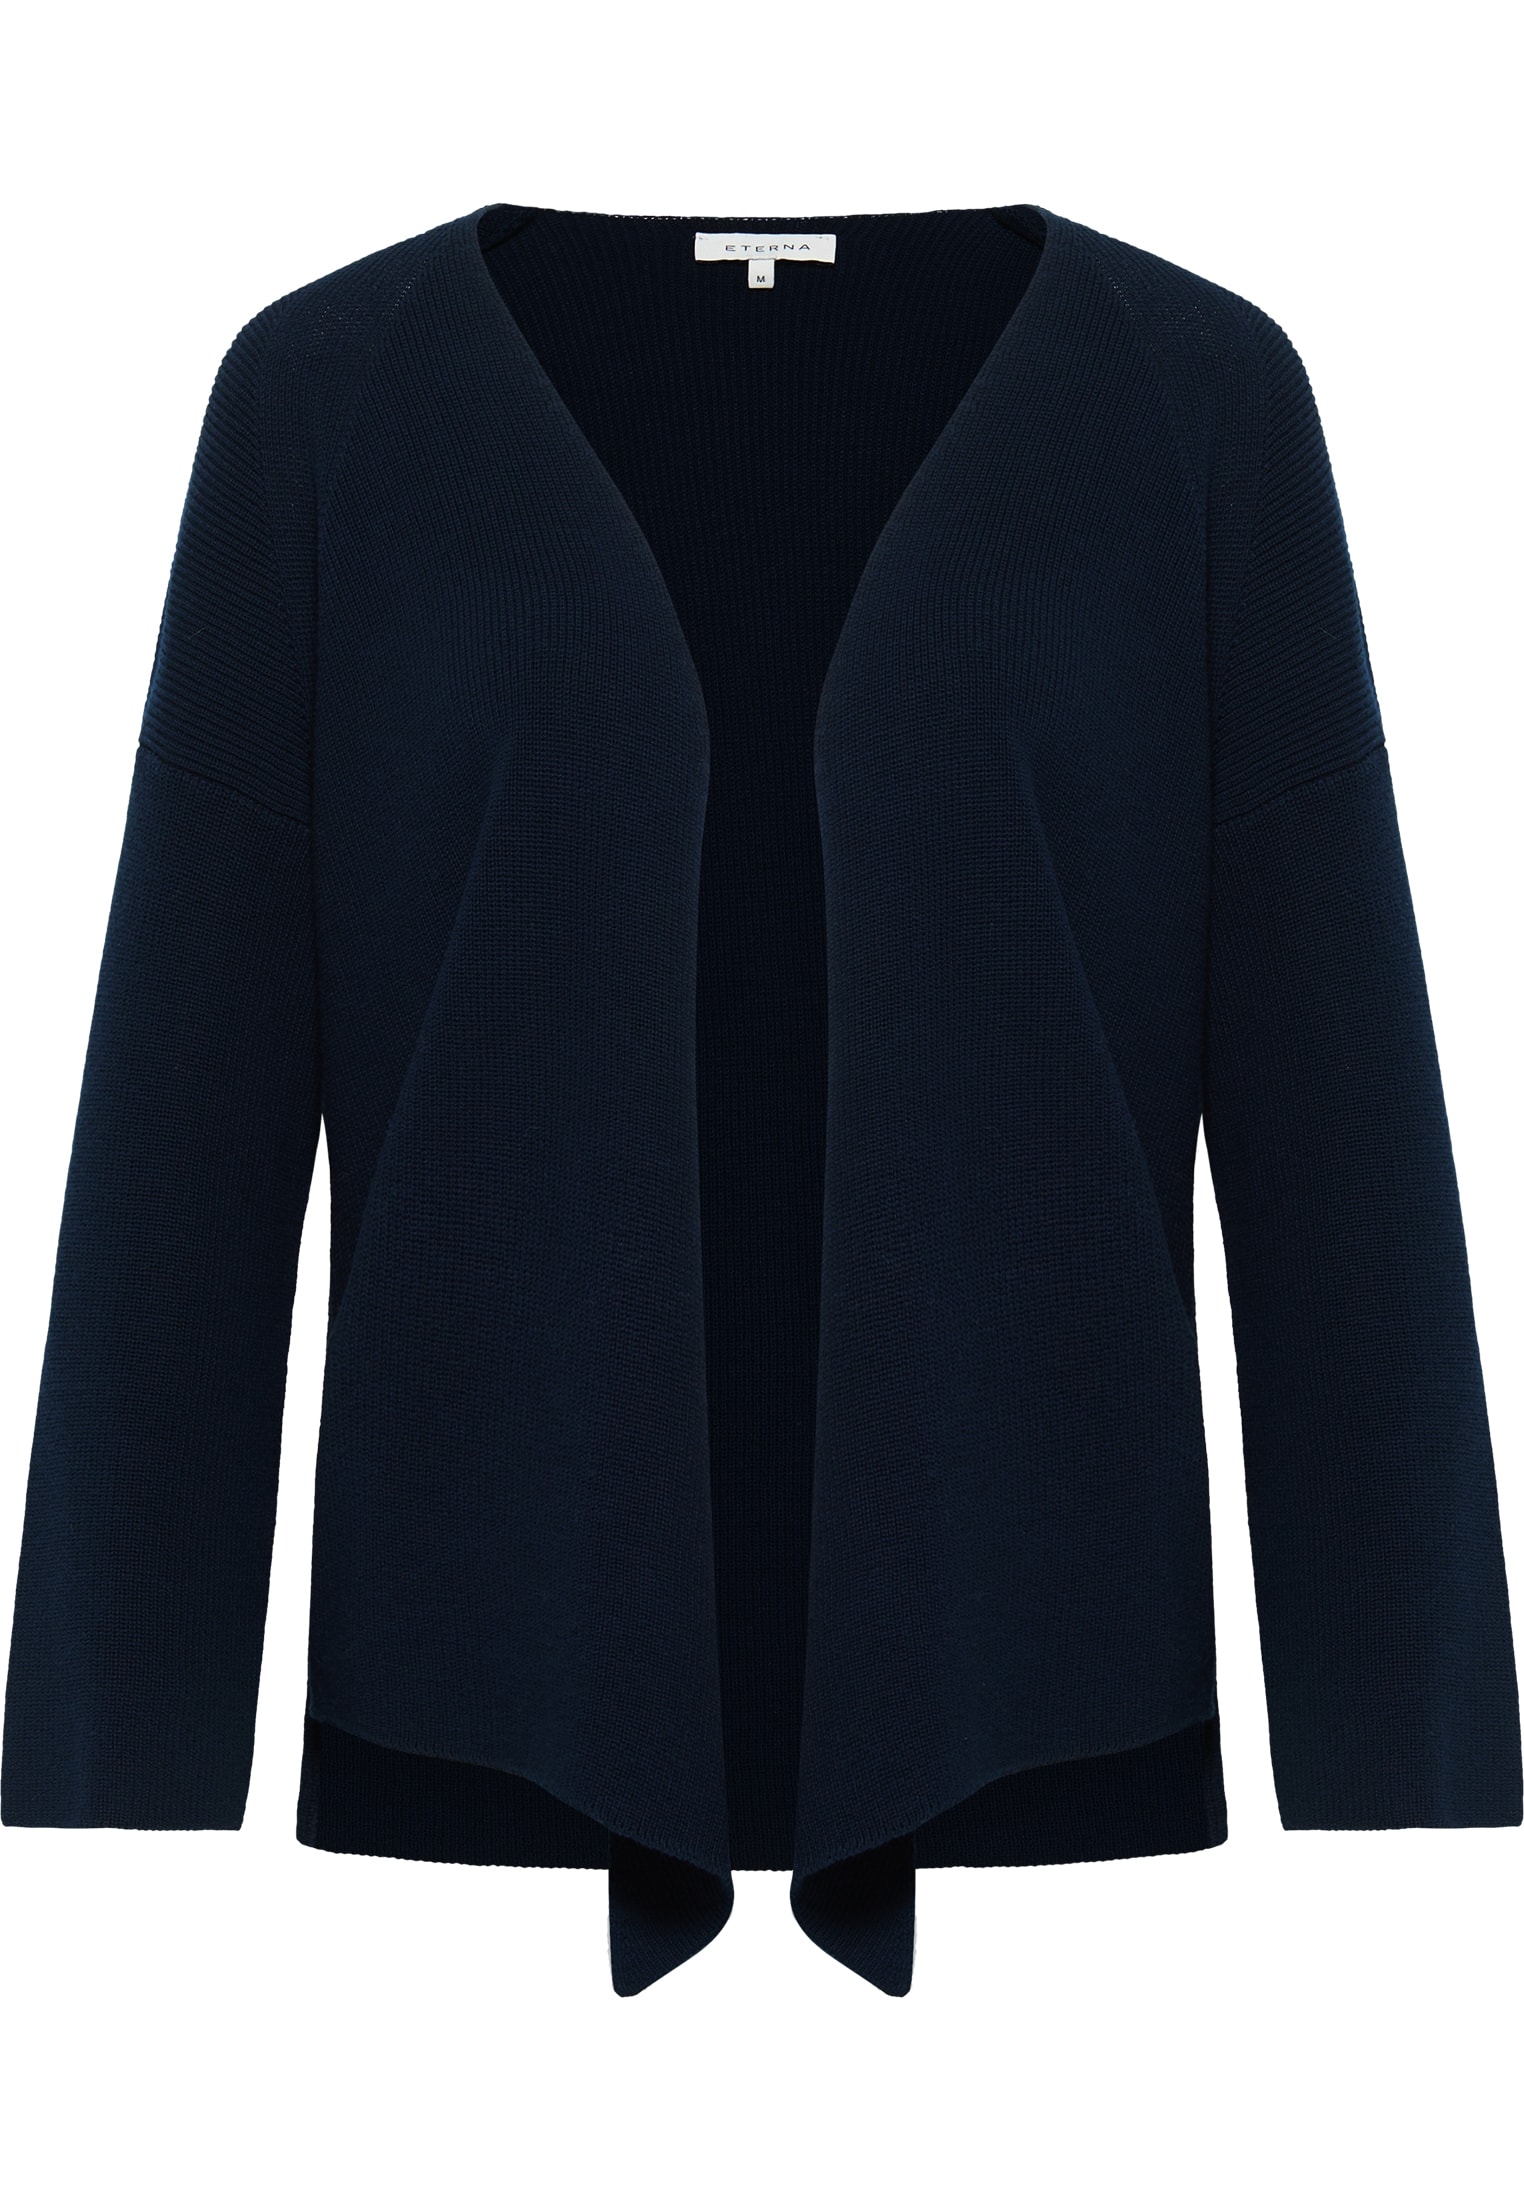 Knitted cardigan in navy plain